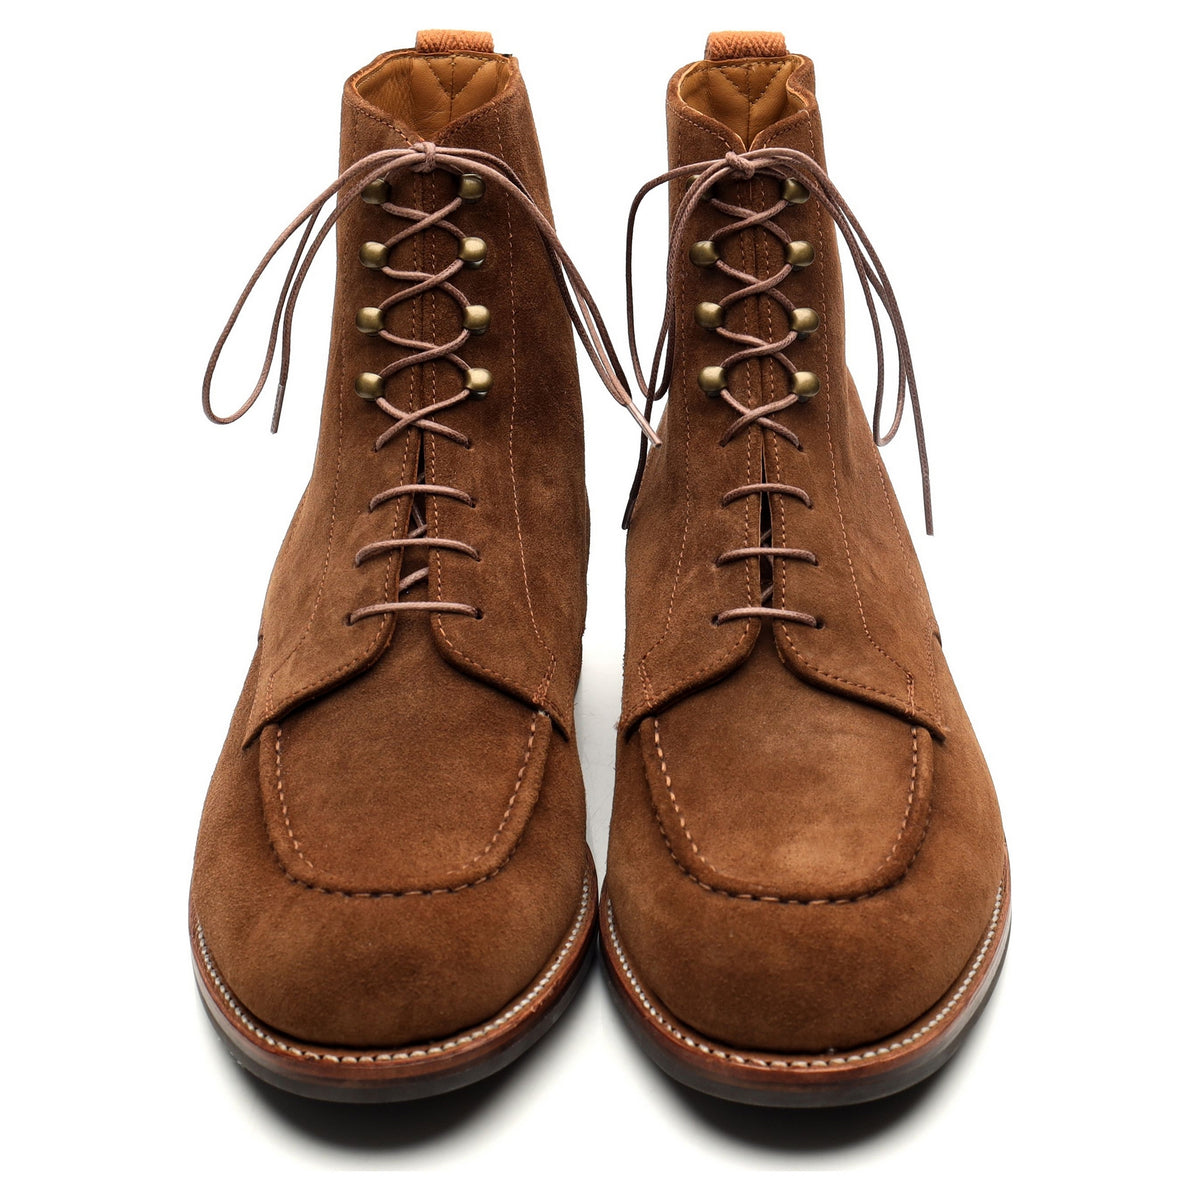 &#39;Sawyer&#39; Tan Brown Suede Apron Boots UK 10 G